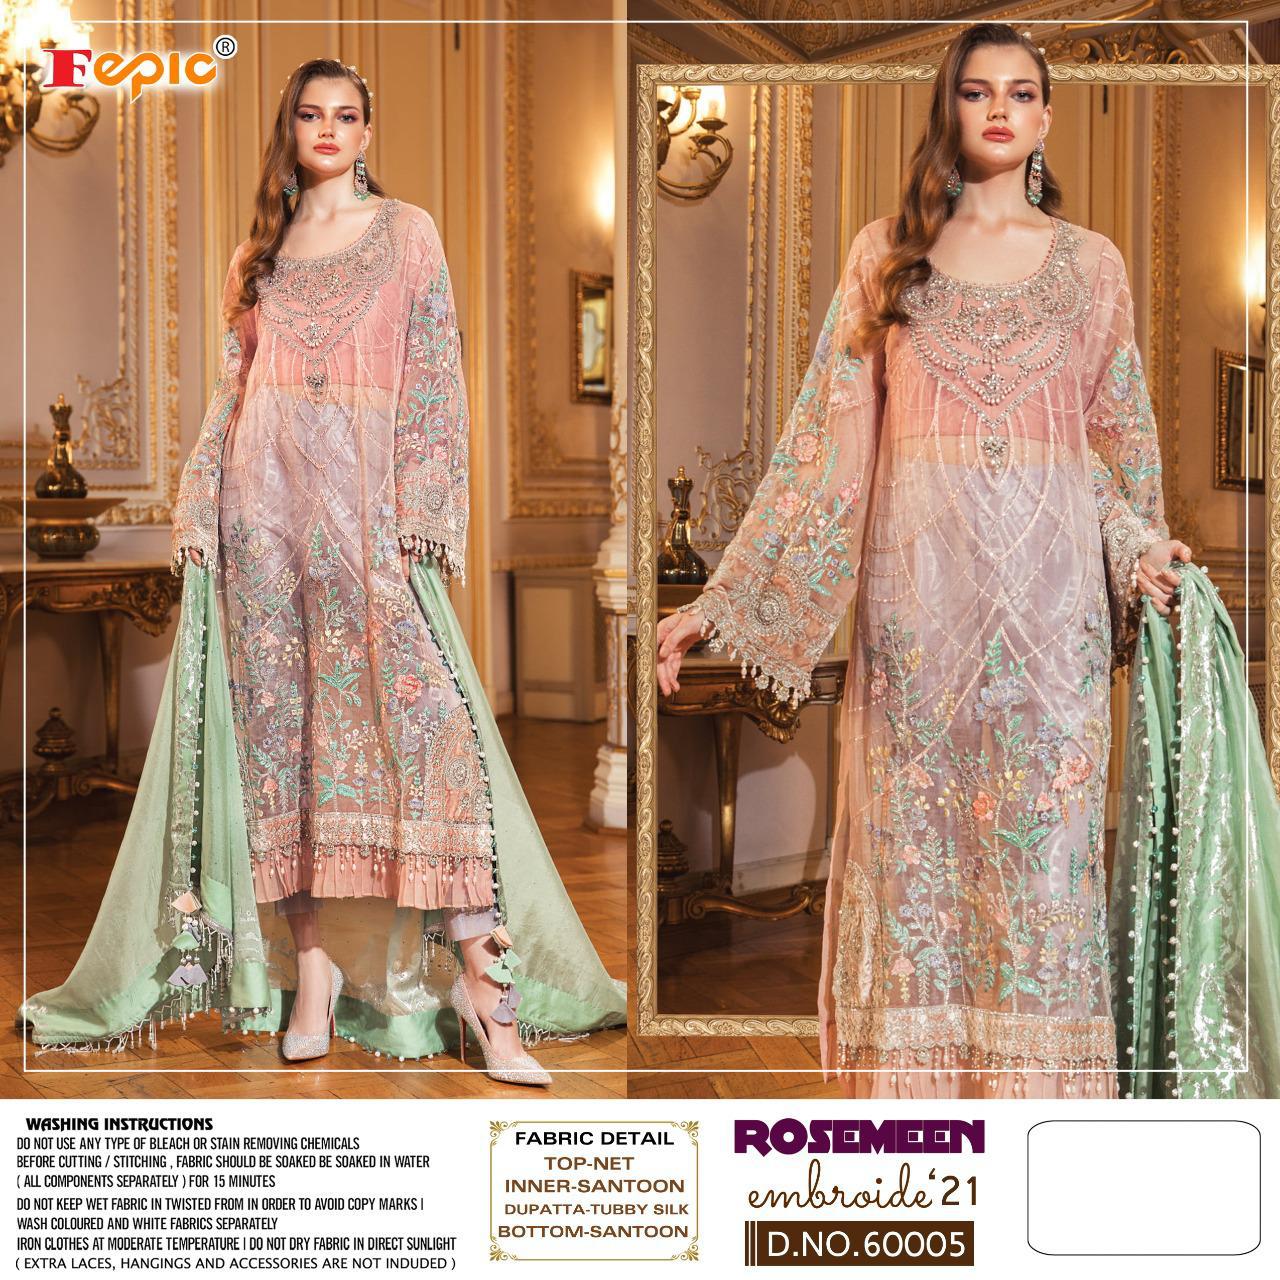 Fepic Rosemeen Embroide-21 60005